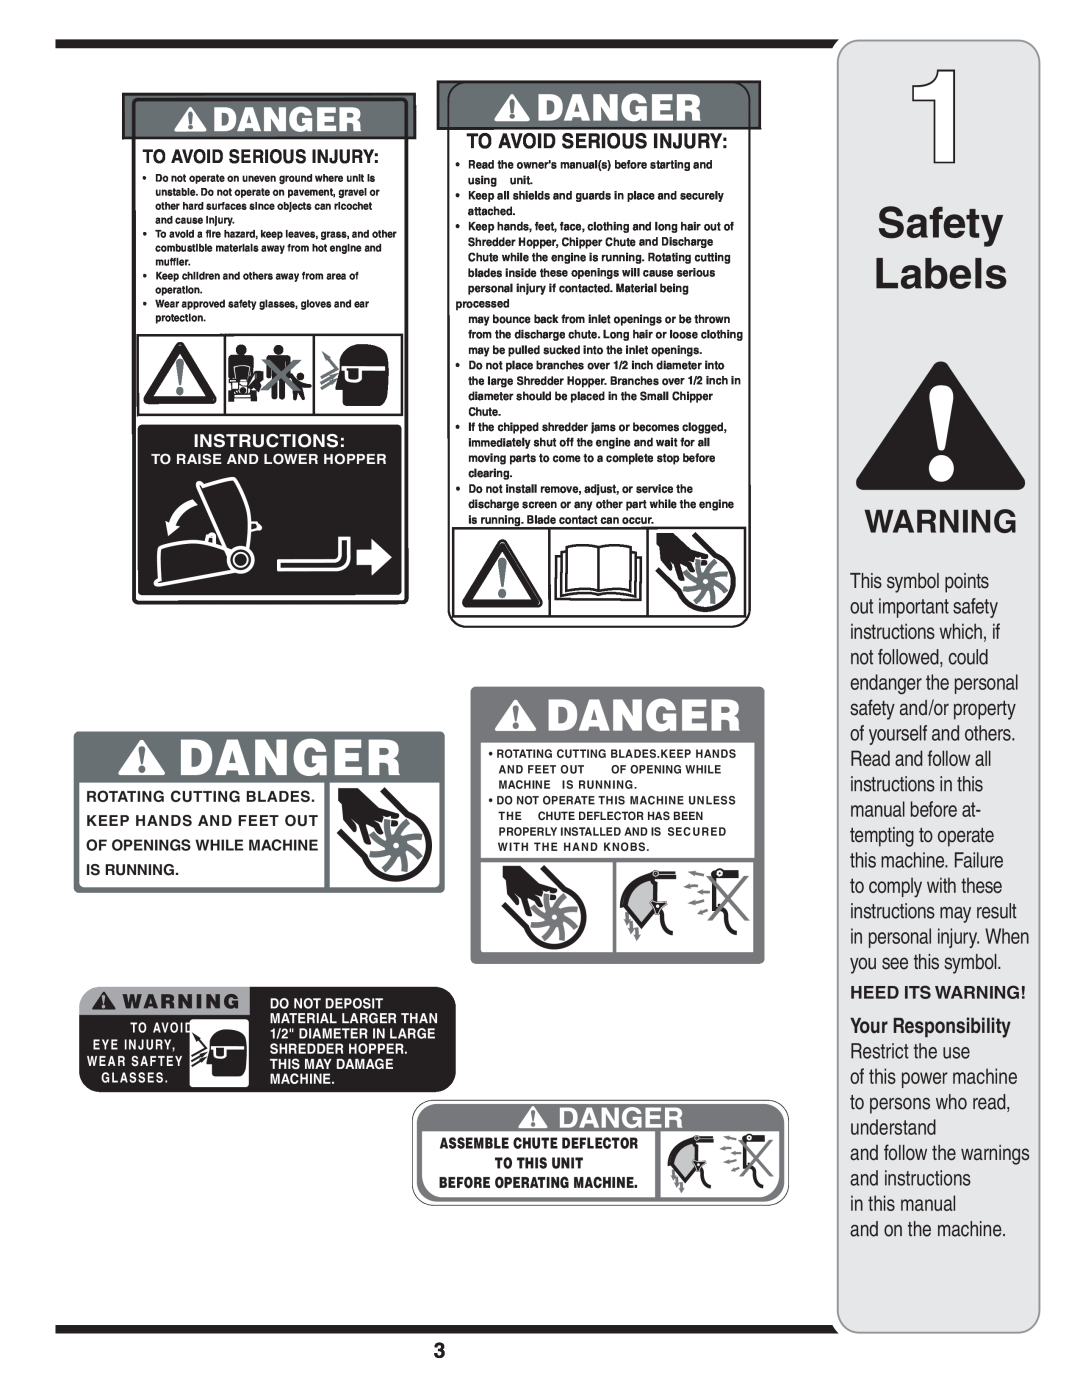 MTD 462 thru 464 warranty Safety Labels, Your Responsibility, Heed Its Warning 